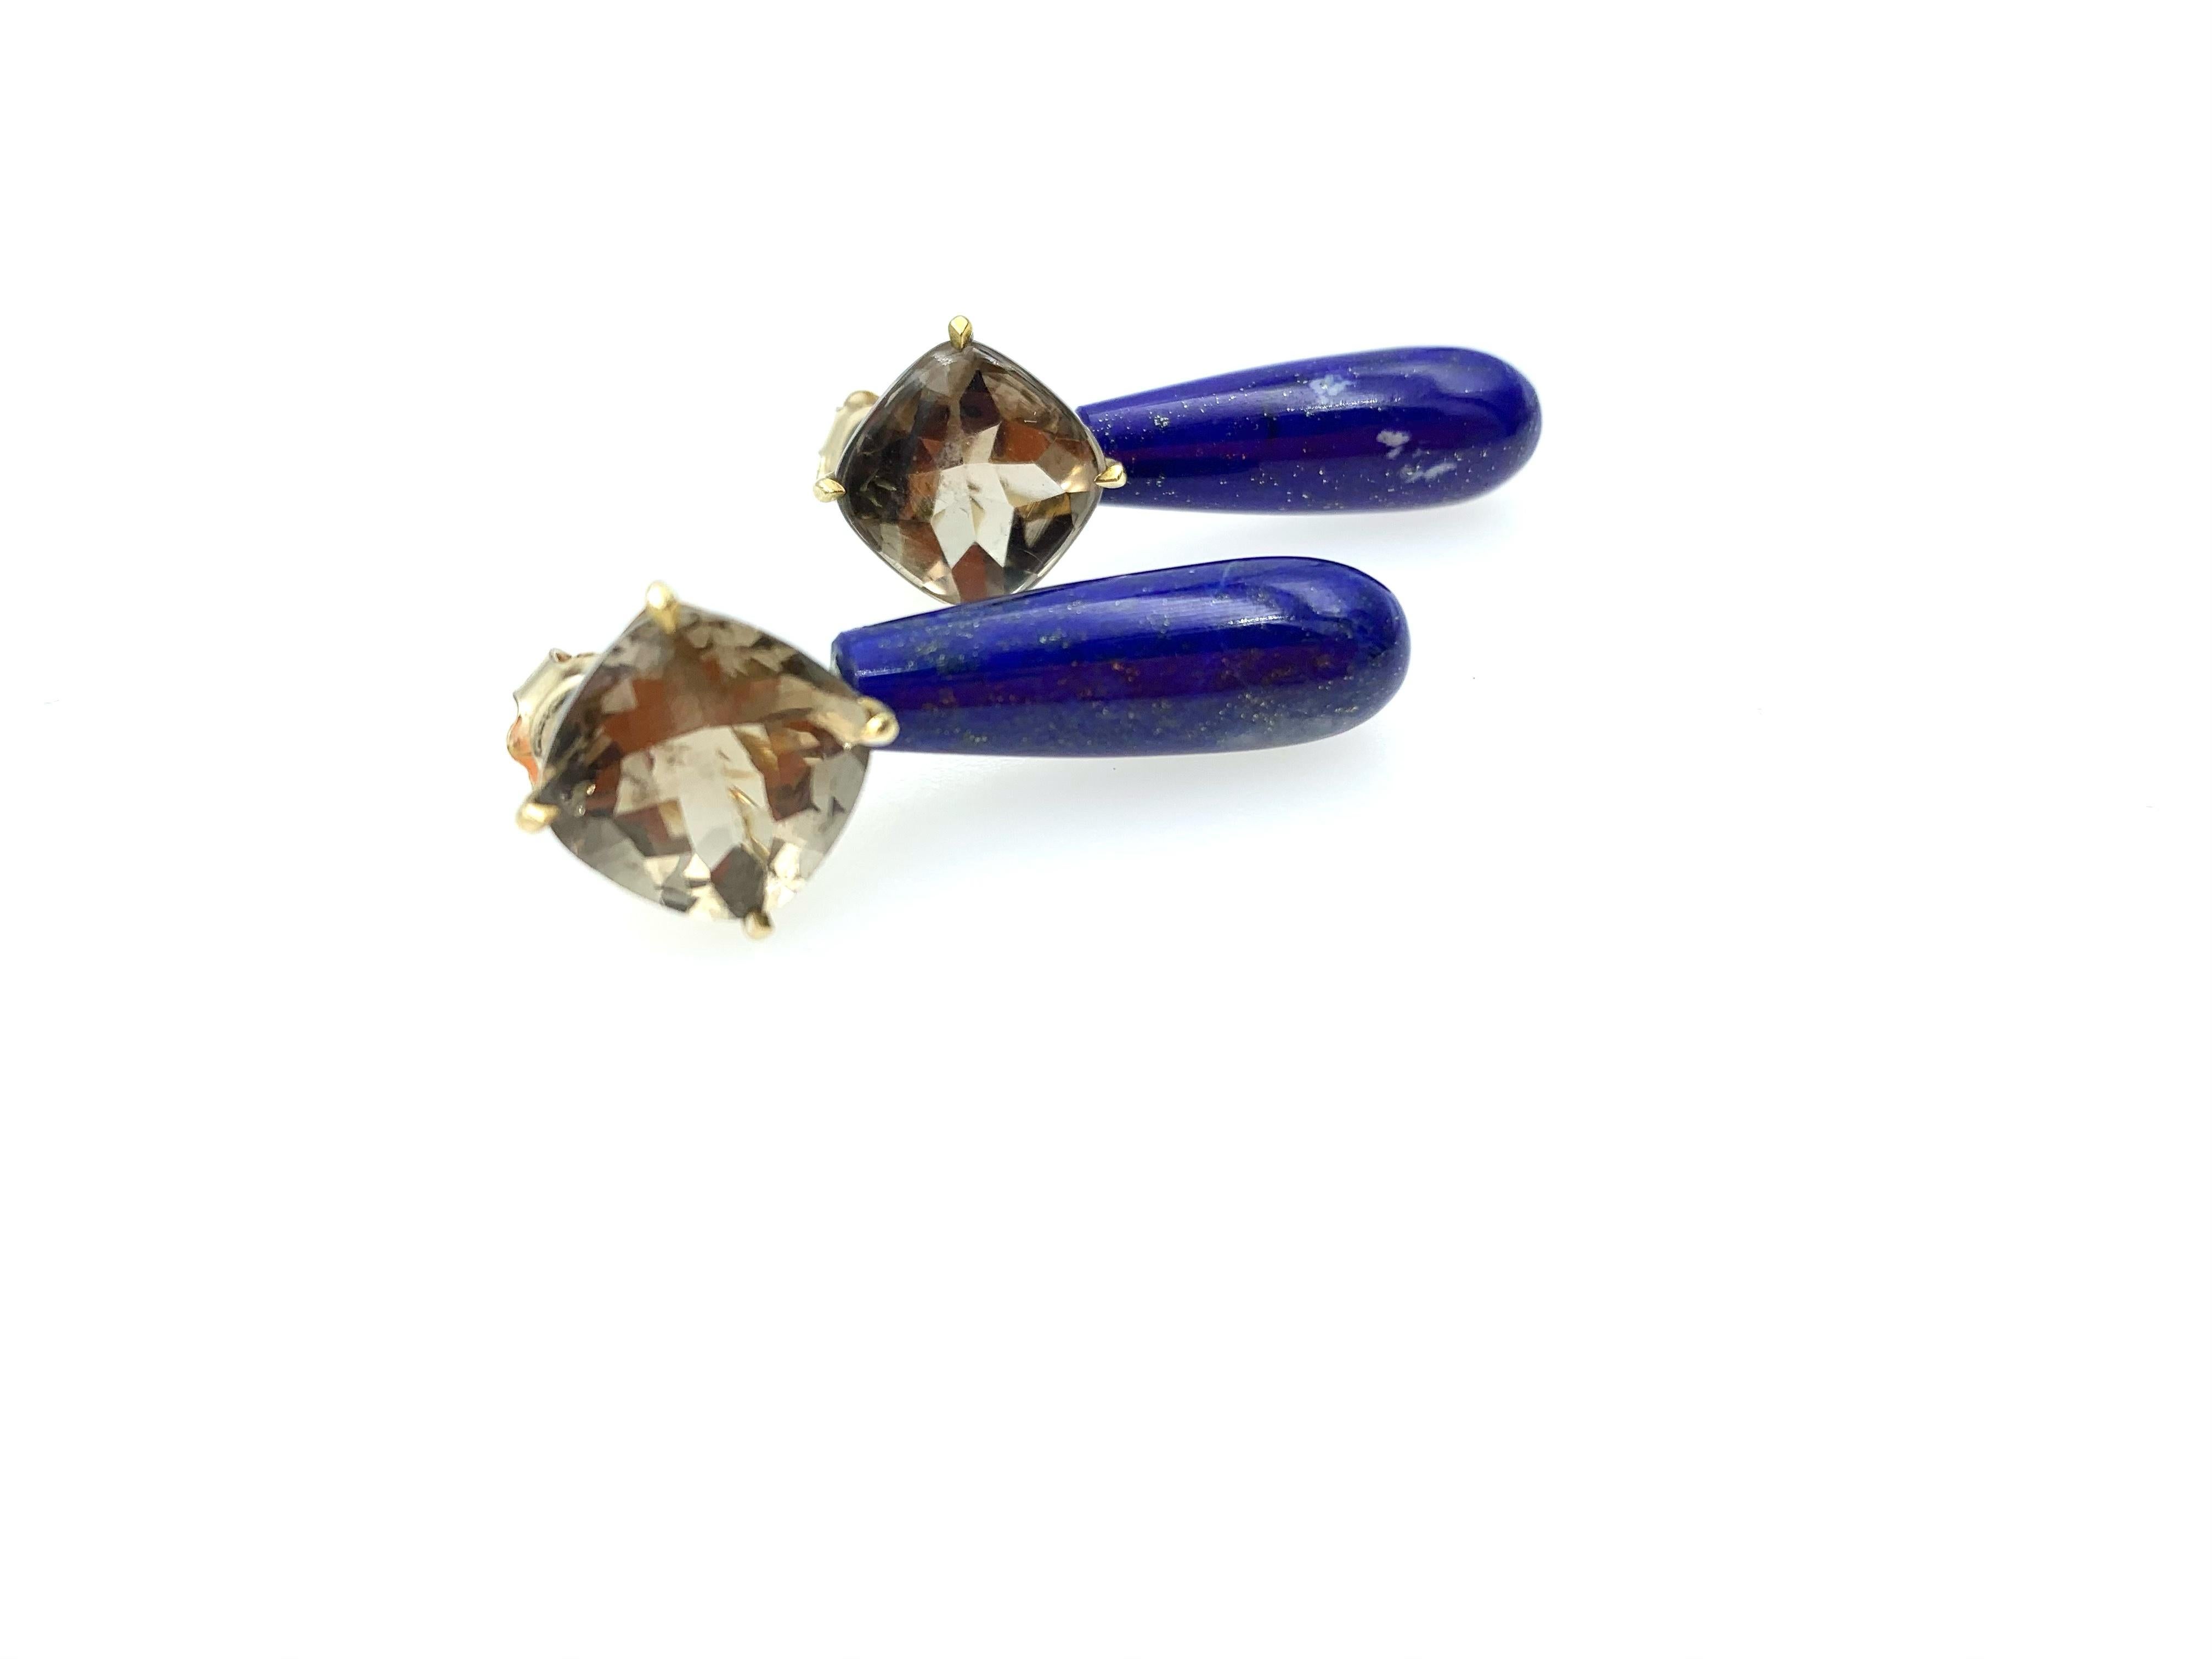 Hand made in 9 karat yellow gold with two Smokey Quartz, one square buff top and the other square rose cut. Both stones are 1 x 1 cms. The Lapis Lazuli smooth brioletts have a beautiful gold speckled shine to them with a length of 2.5 cms long. The